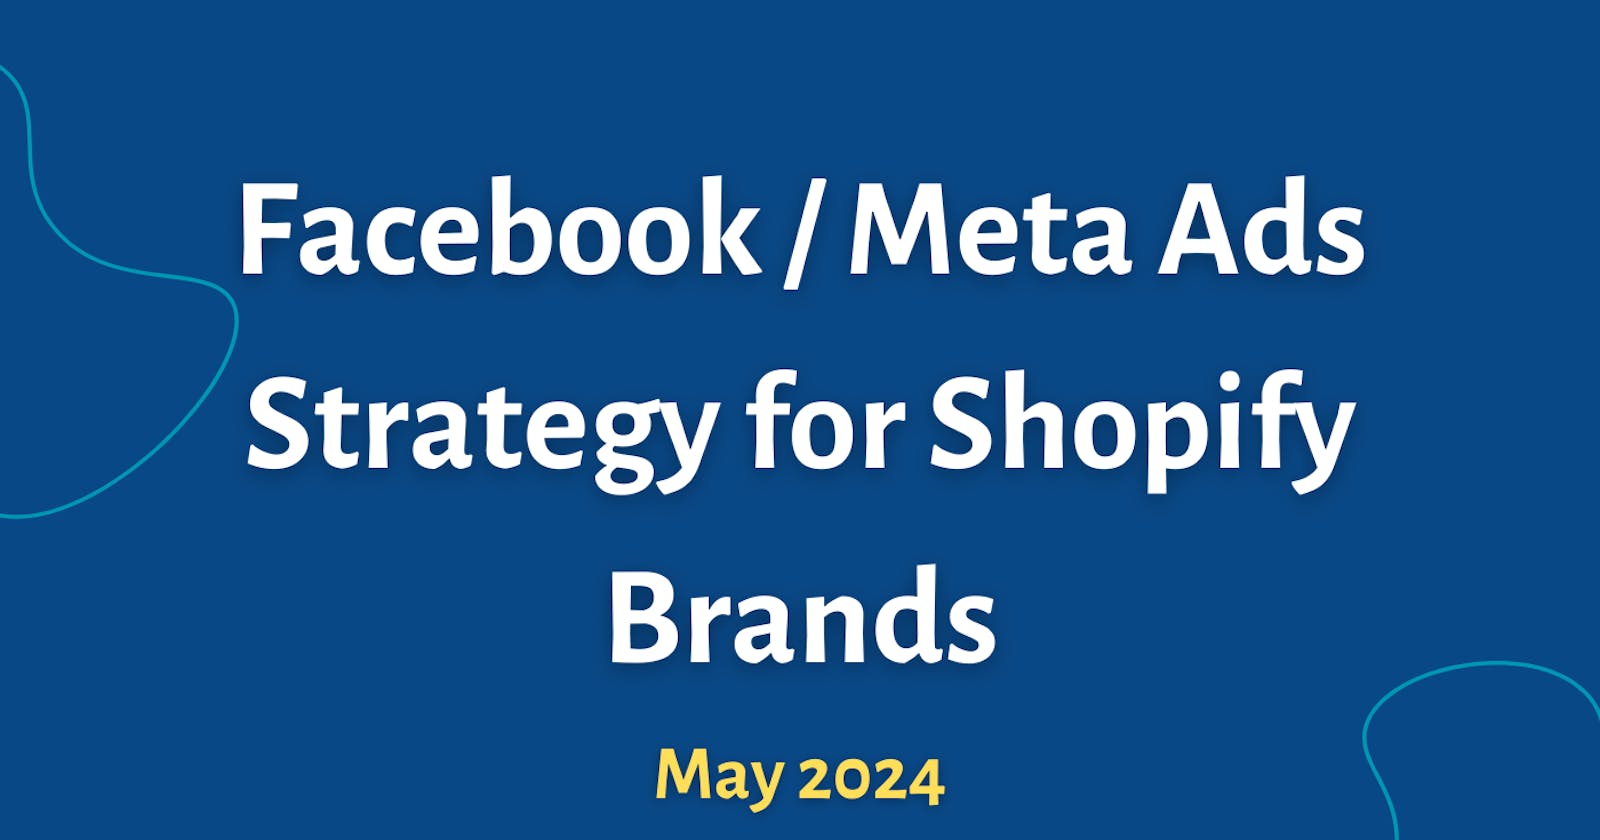 Short Facebook / Meta Ads Strategy for Shopify Brands - May 2024